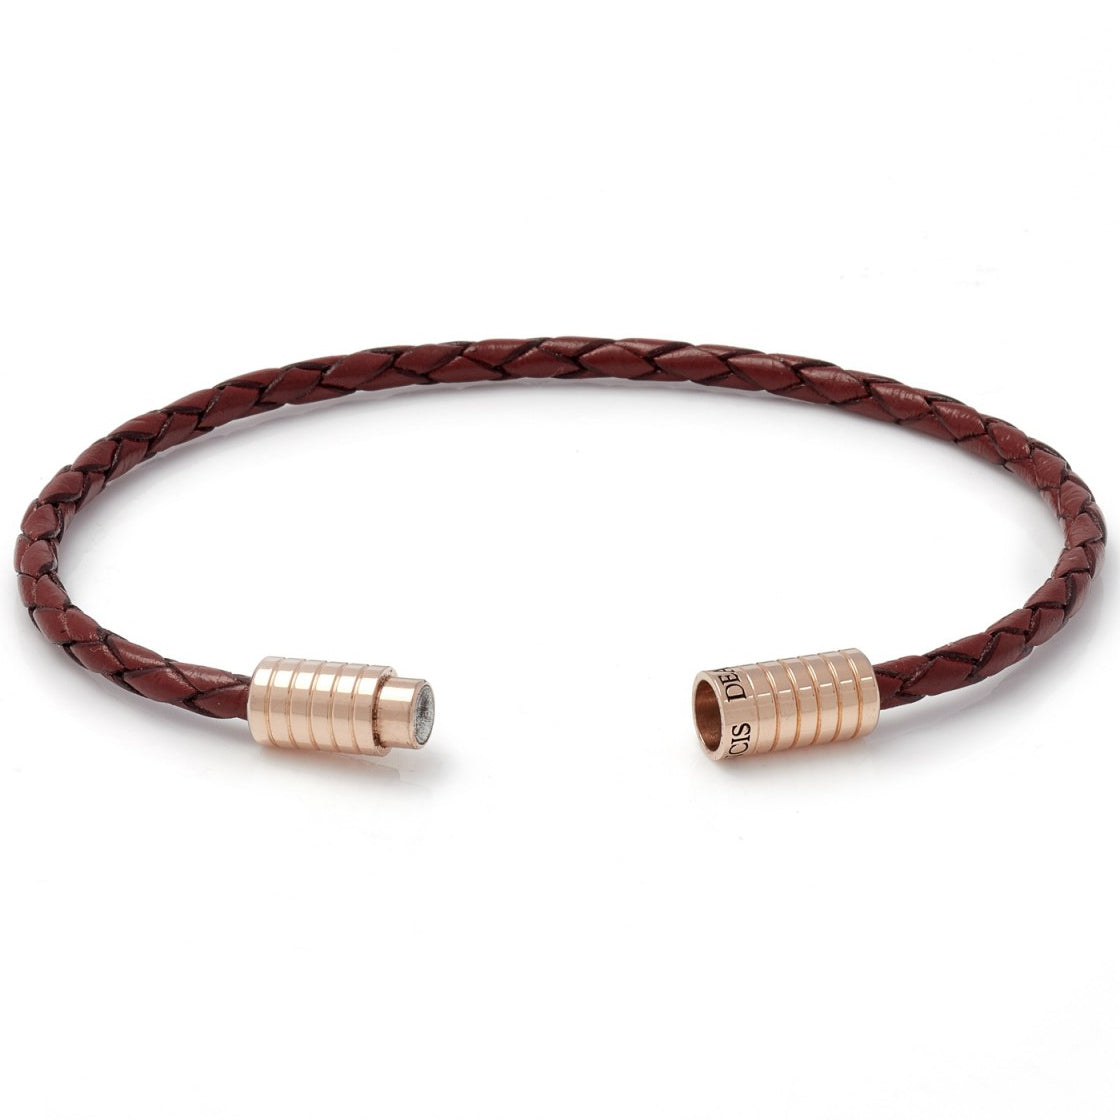 Deakin & Francis Woven Leather Bracelet, Brown, Length 7 inches